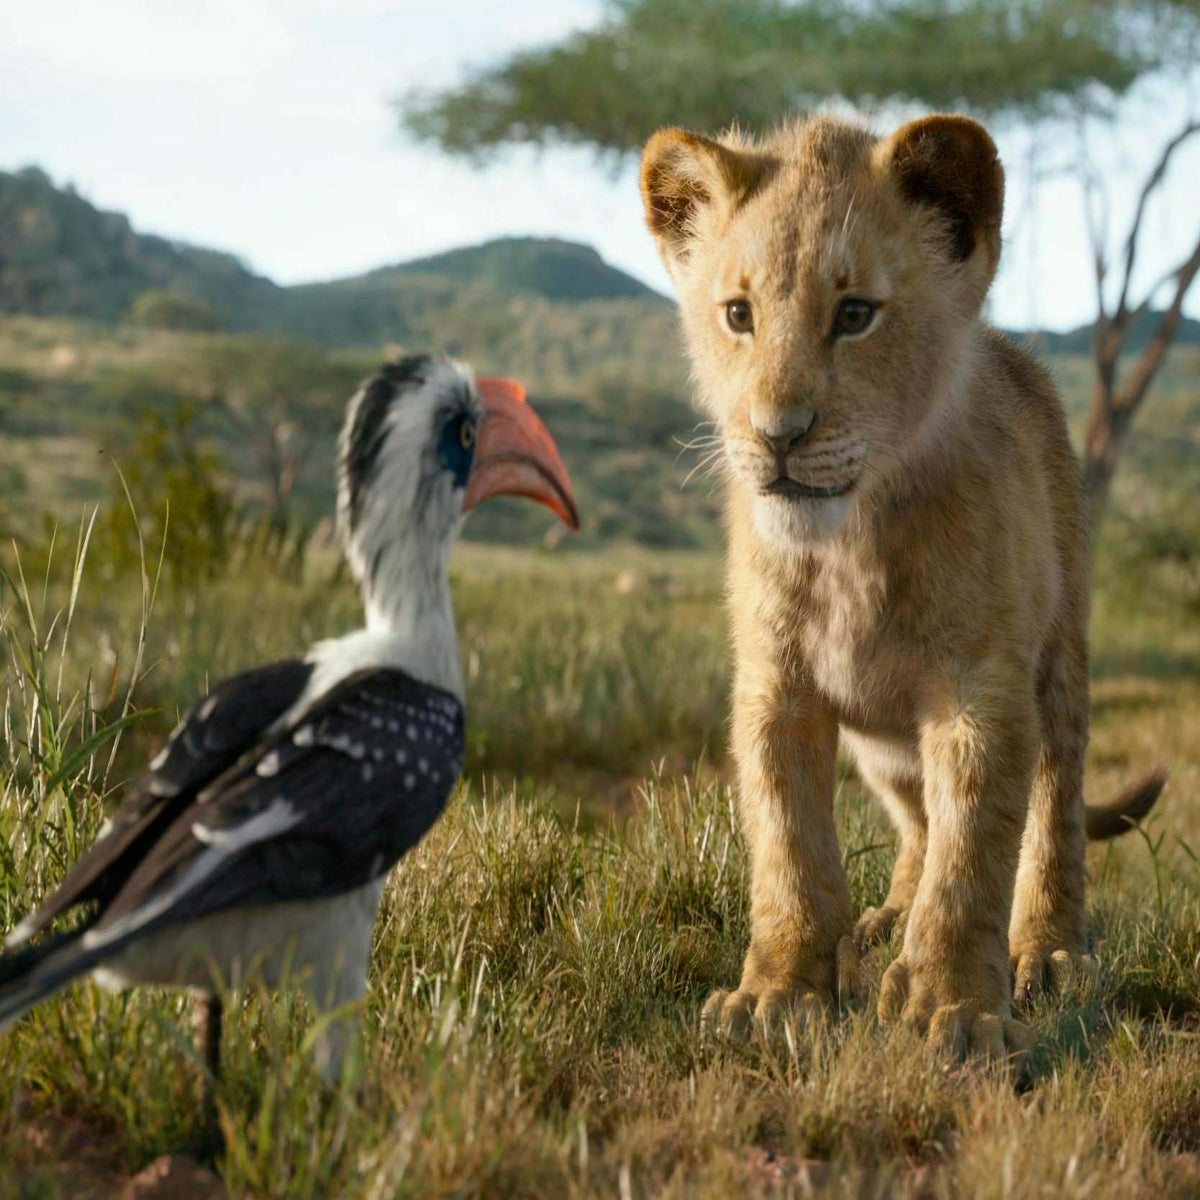 Original Lion King animator launches scathing attack on 'cheap' remake |  The Independent | The Independent